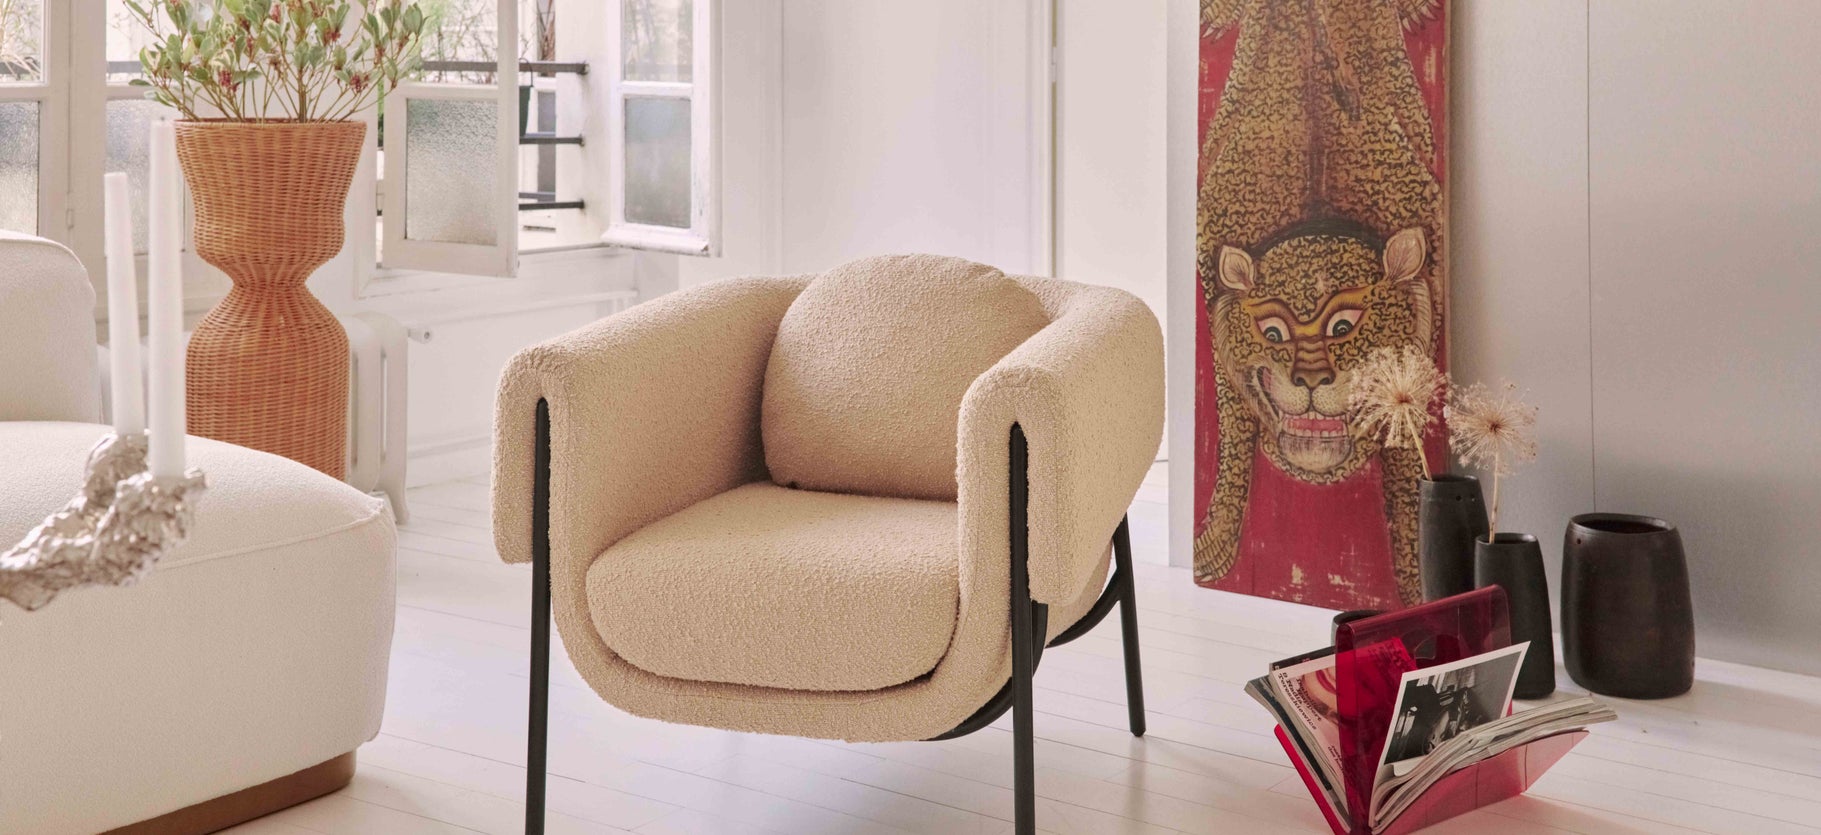 Inspiration MOCHI Armchairs Beige / Black Curly / Metal